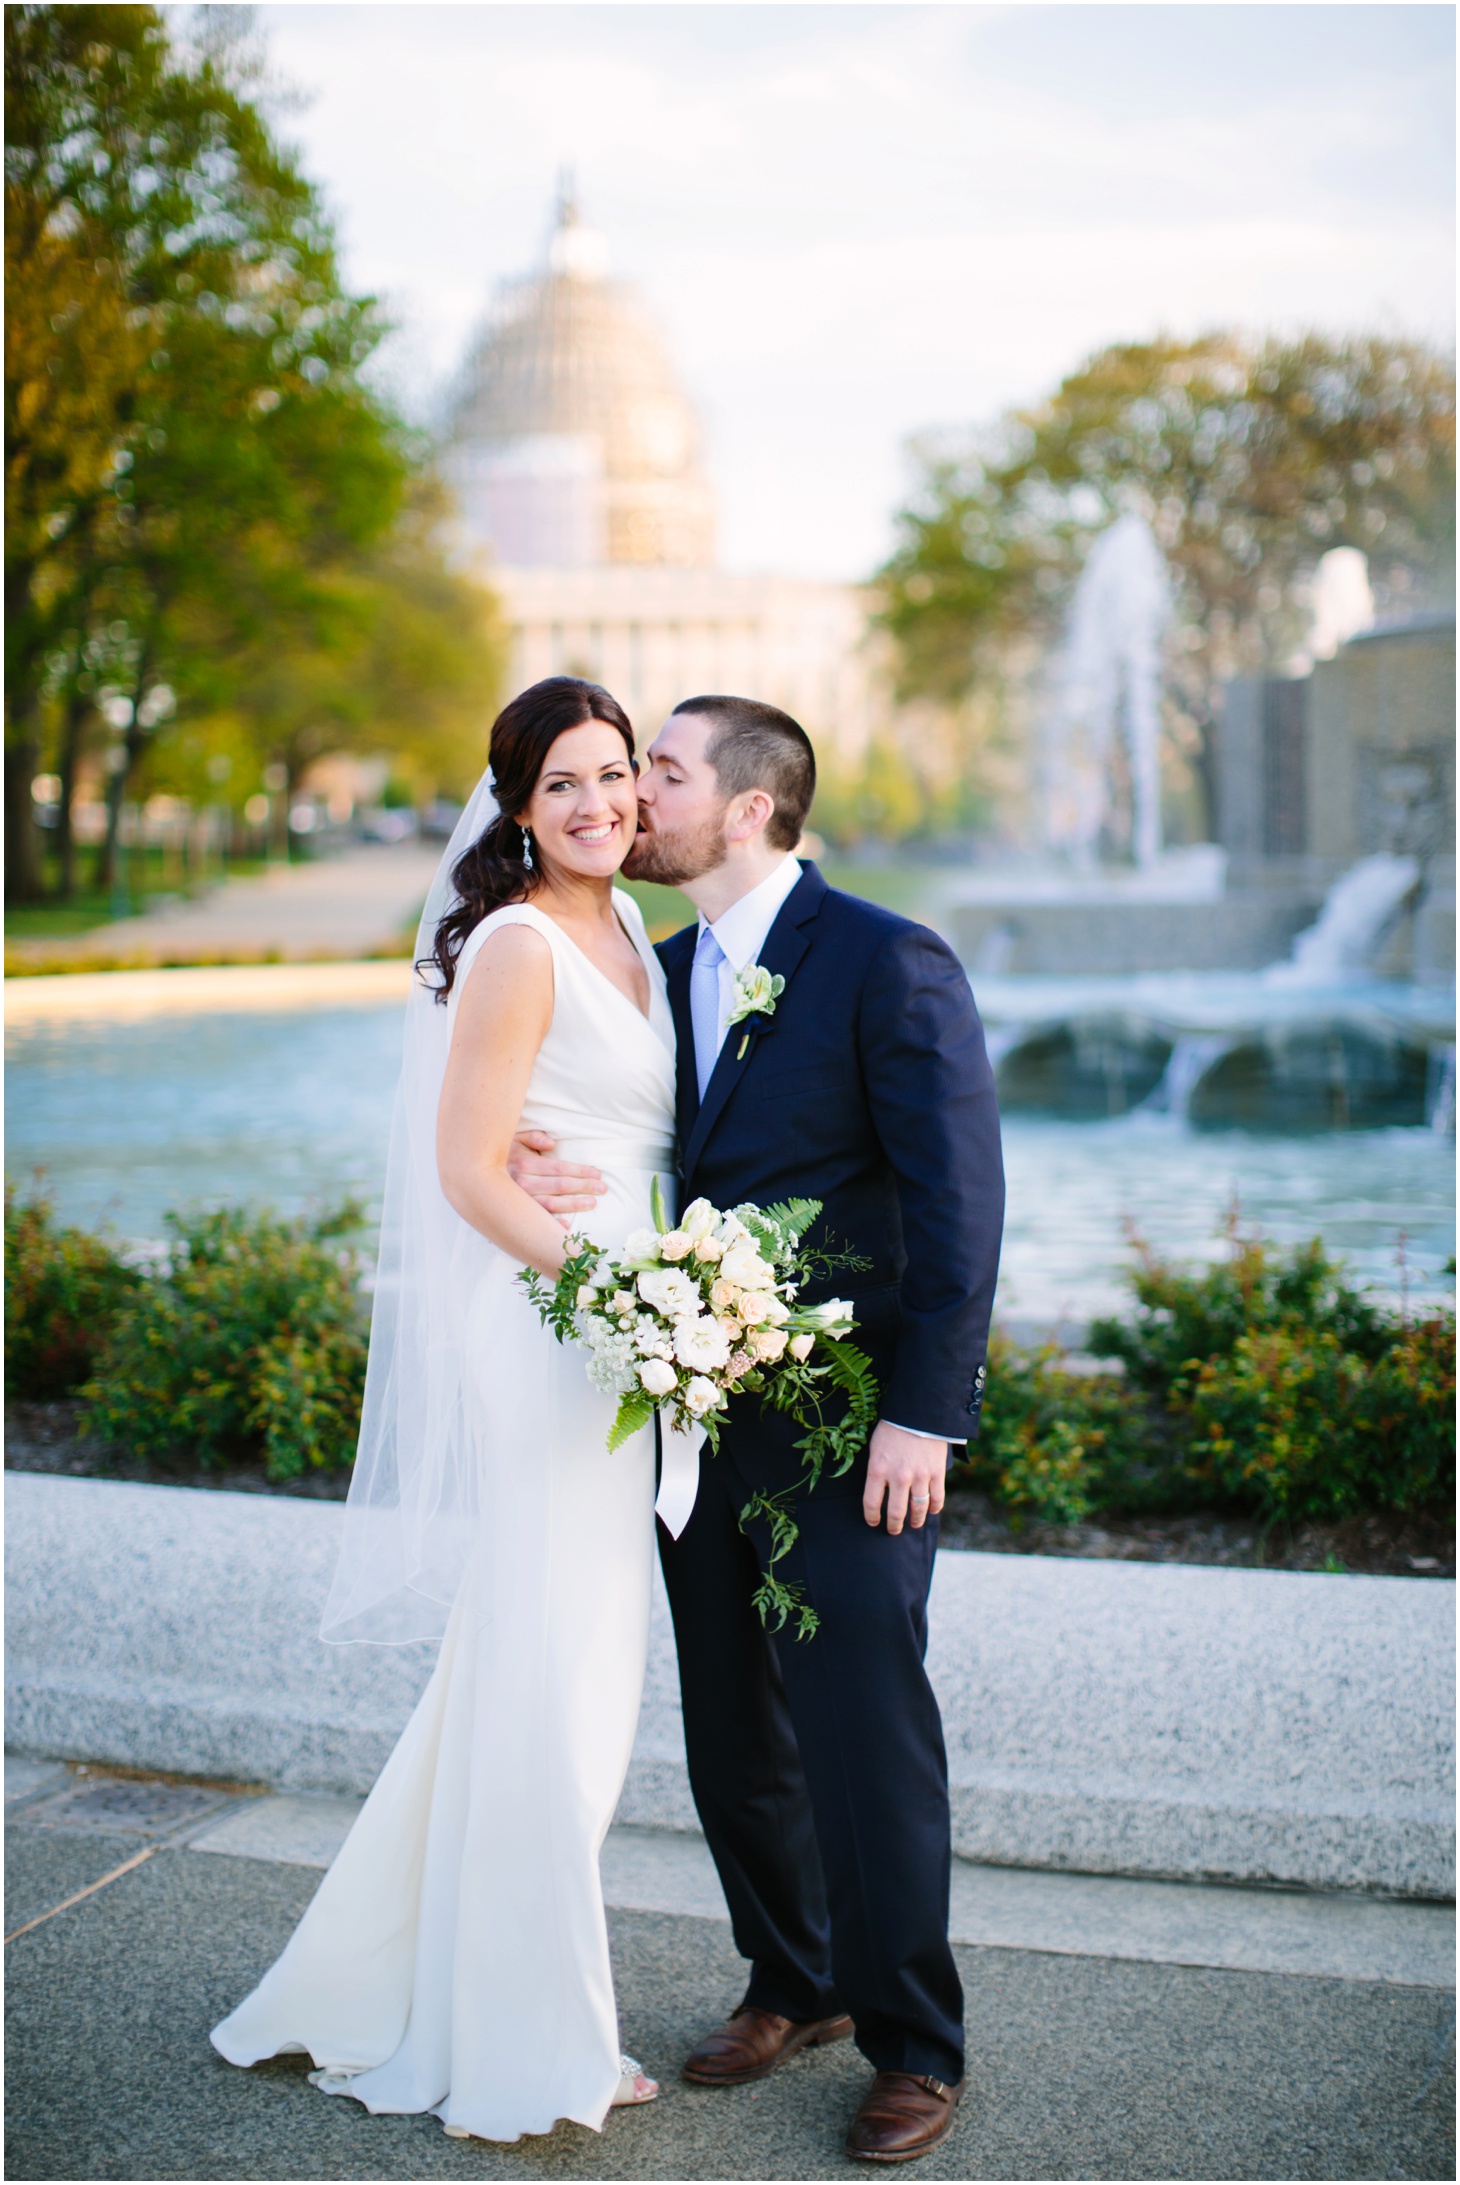 Mikey & Megan, Downtown DC Wedding at National Museum of Women in the Arts by Sarah Bradshaw Photography_0037.jpg